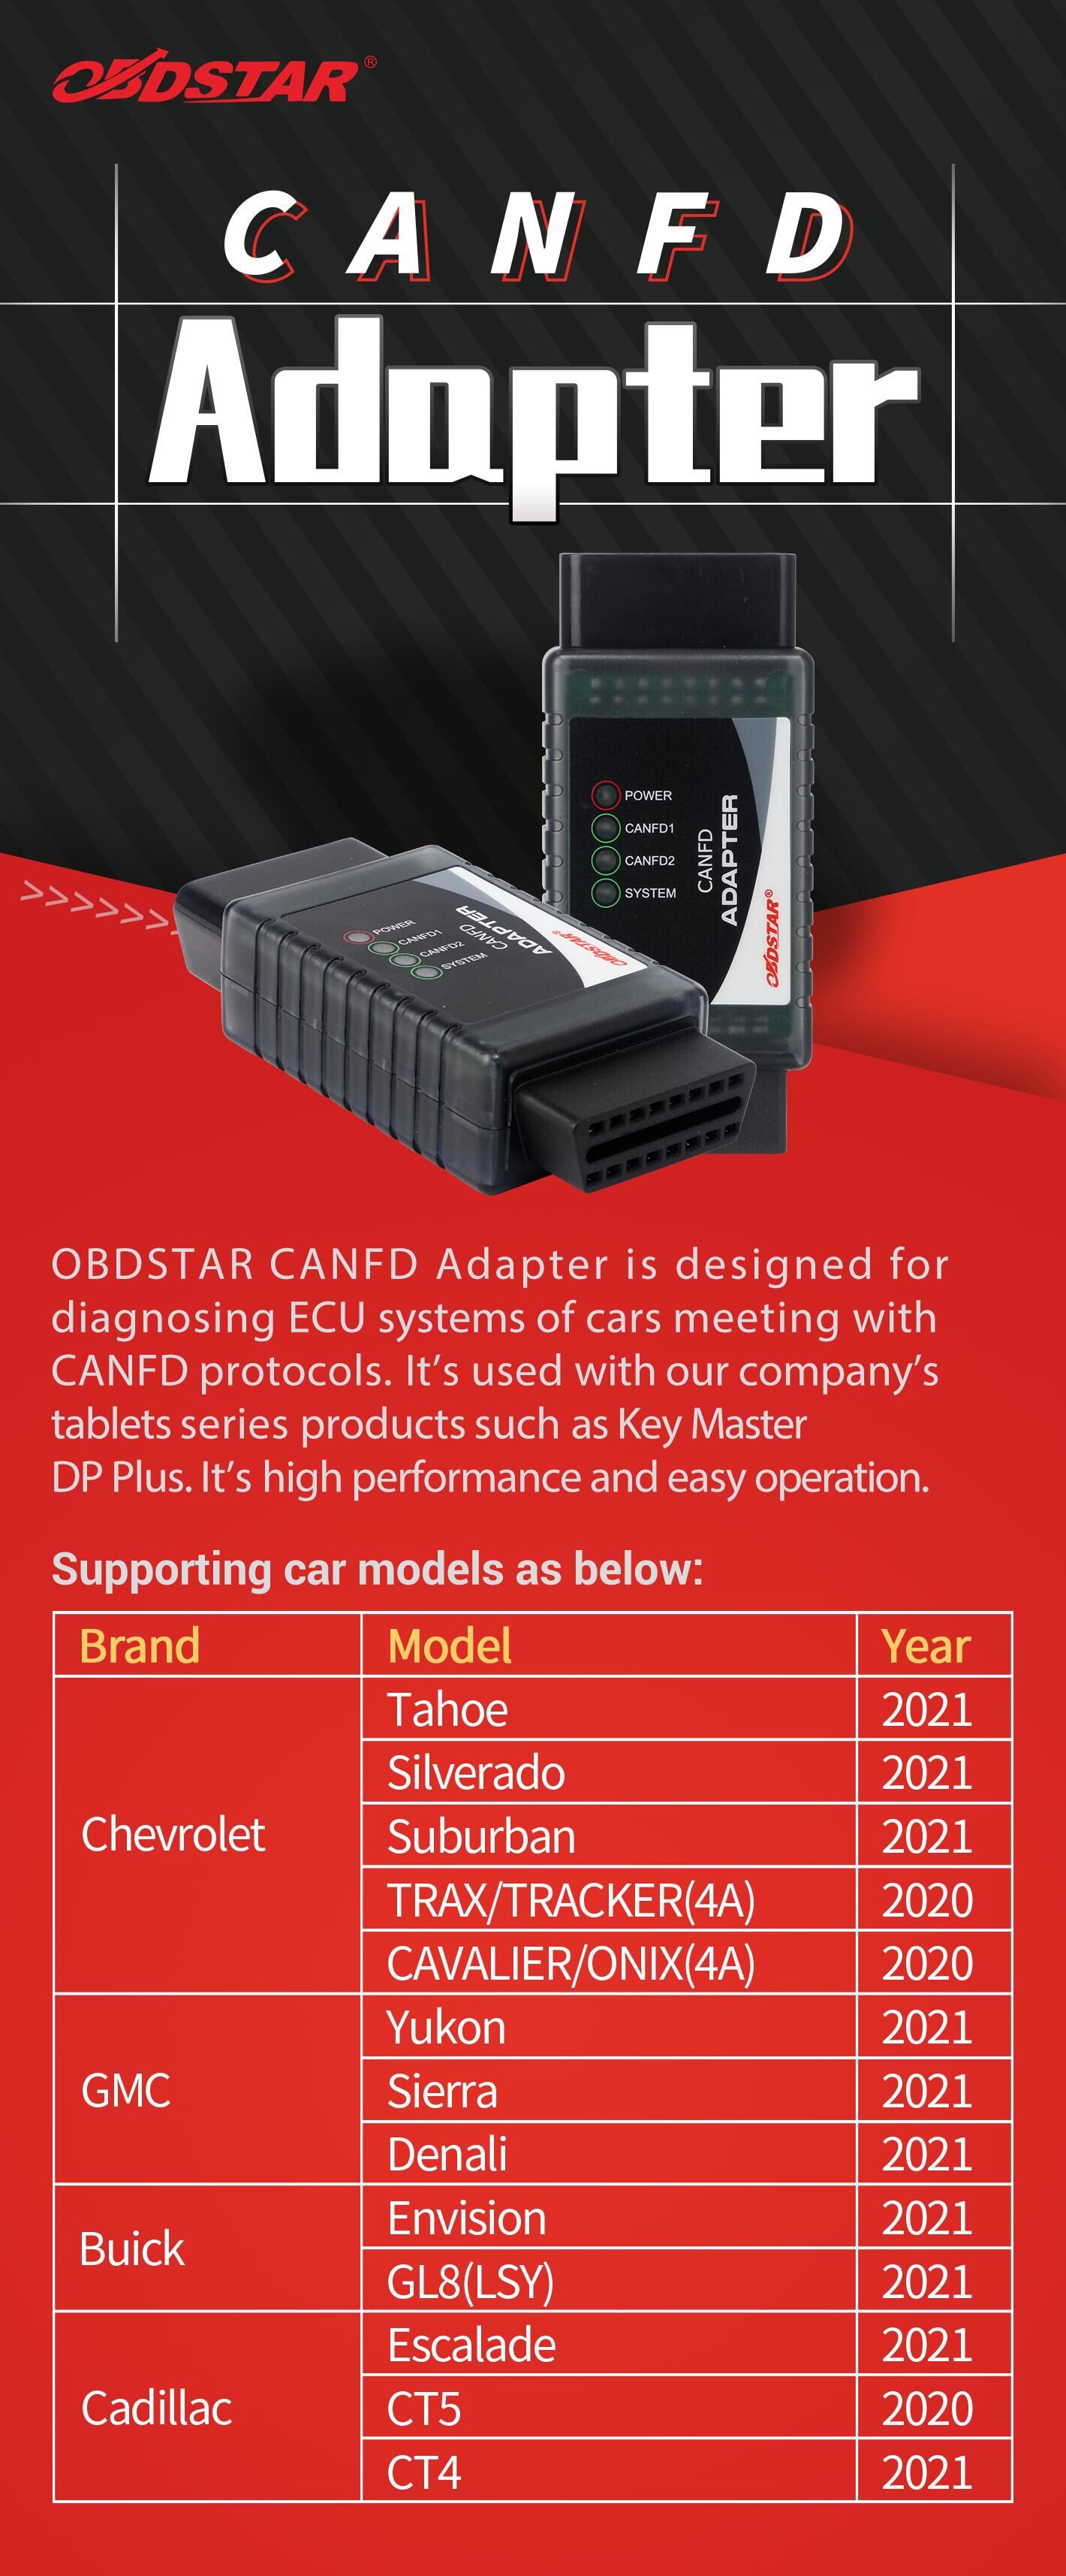 Introduction to OBDSTAR CAN FD Adapter